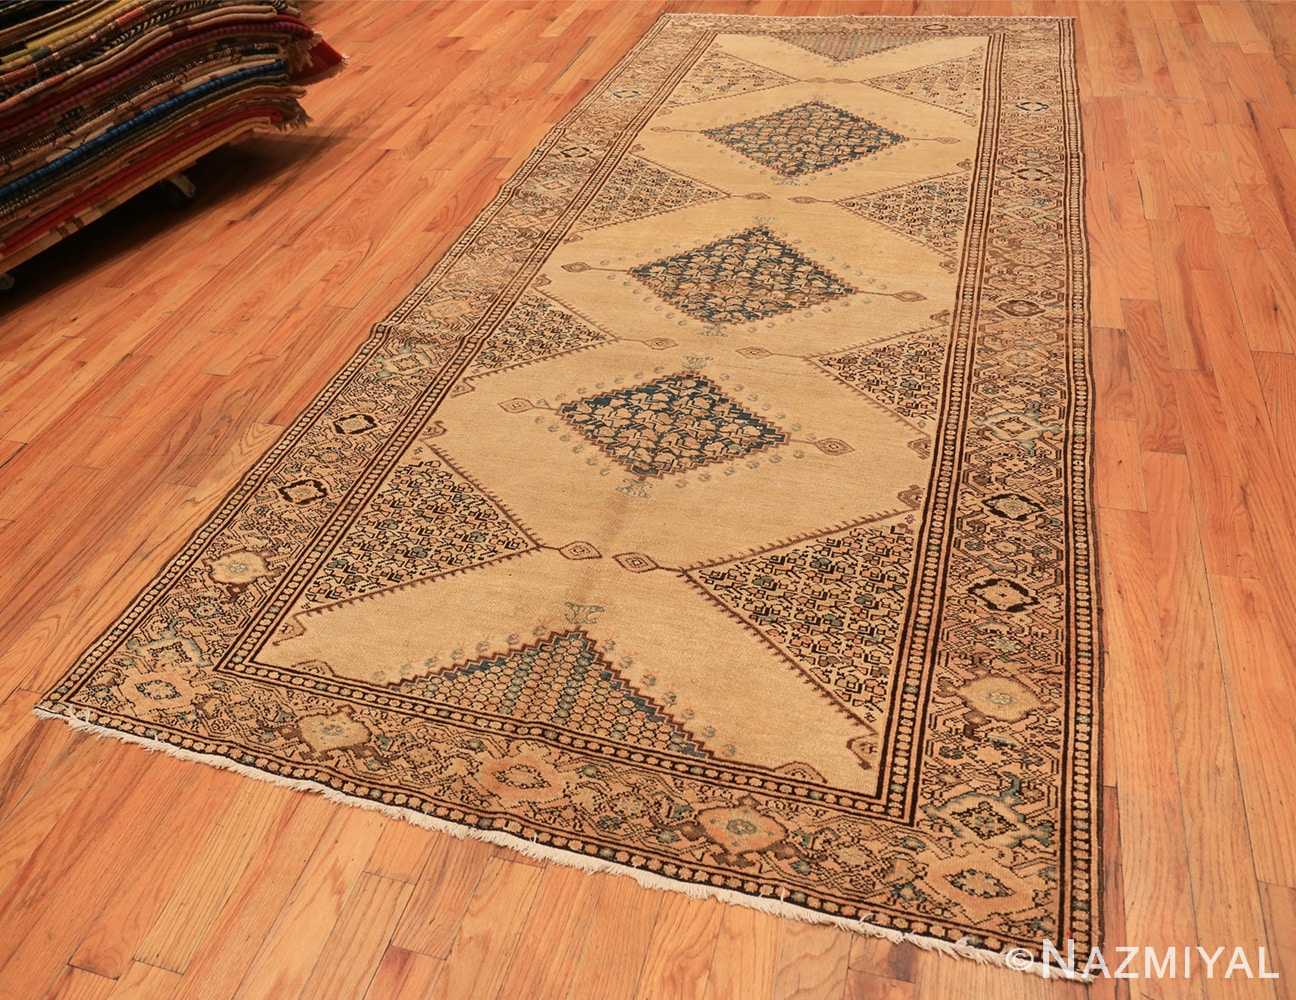 Full Antique Persian Malayer rug 42462 by Nazmiyal Antique Rugs in NYC